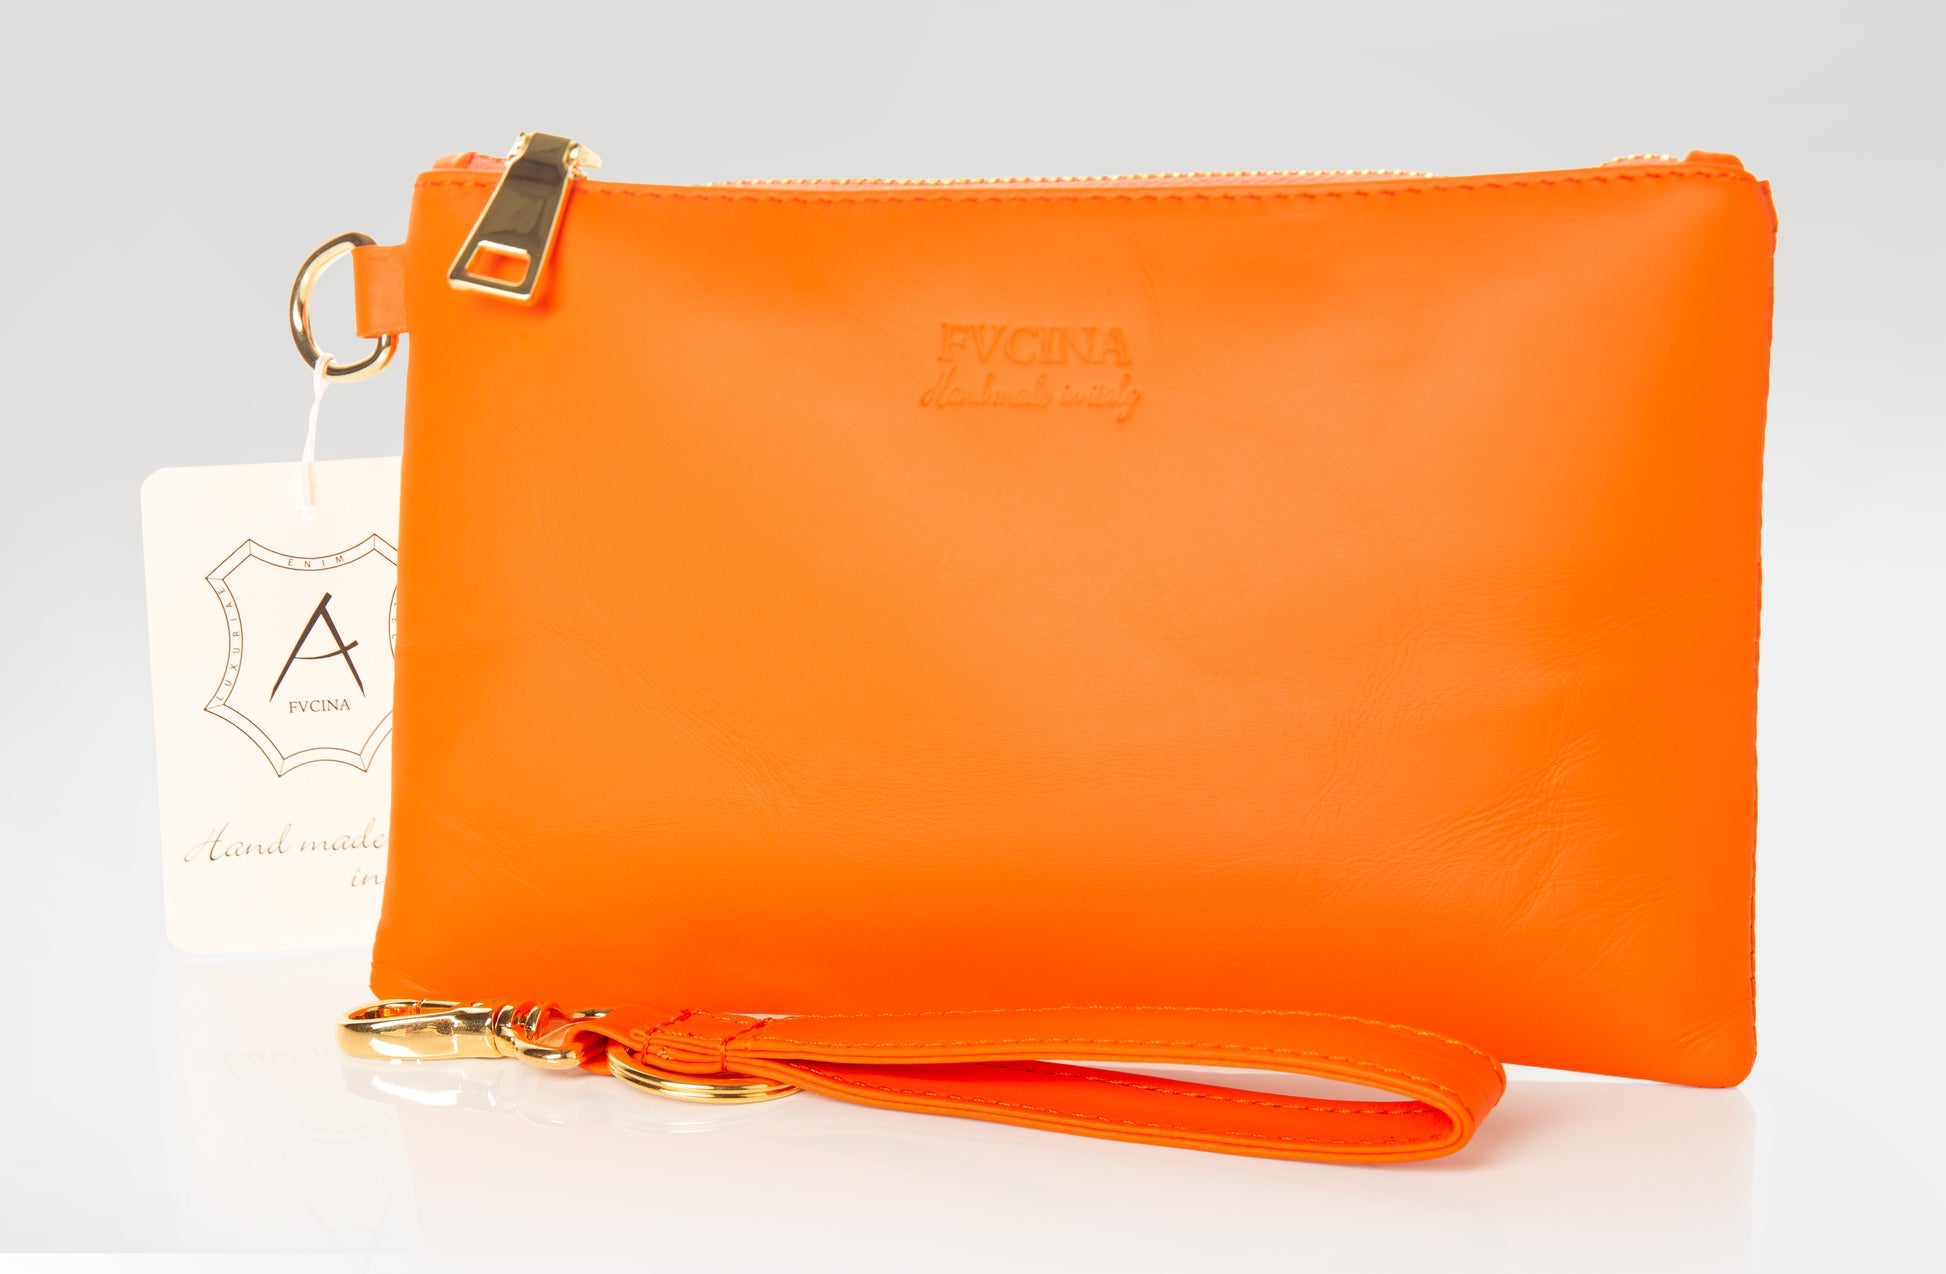 Christmas gifts, orange leather clutch, Italian leather clutch, handmade leather clutch, premium leather clutch, high-quality leather clutch, handbags, women clutches 